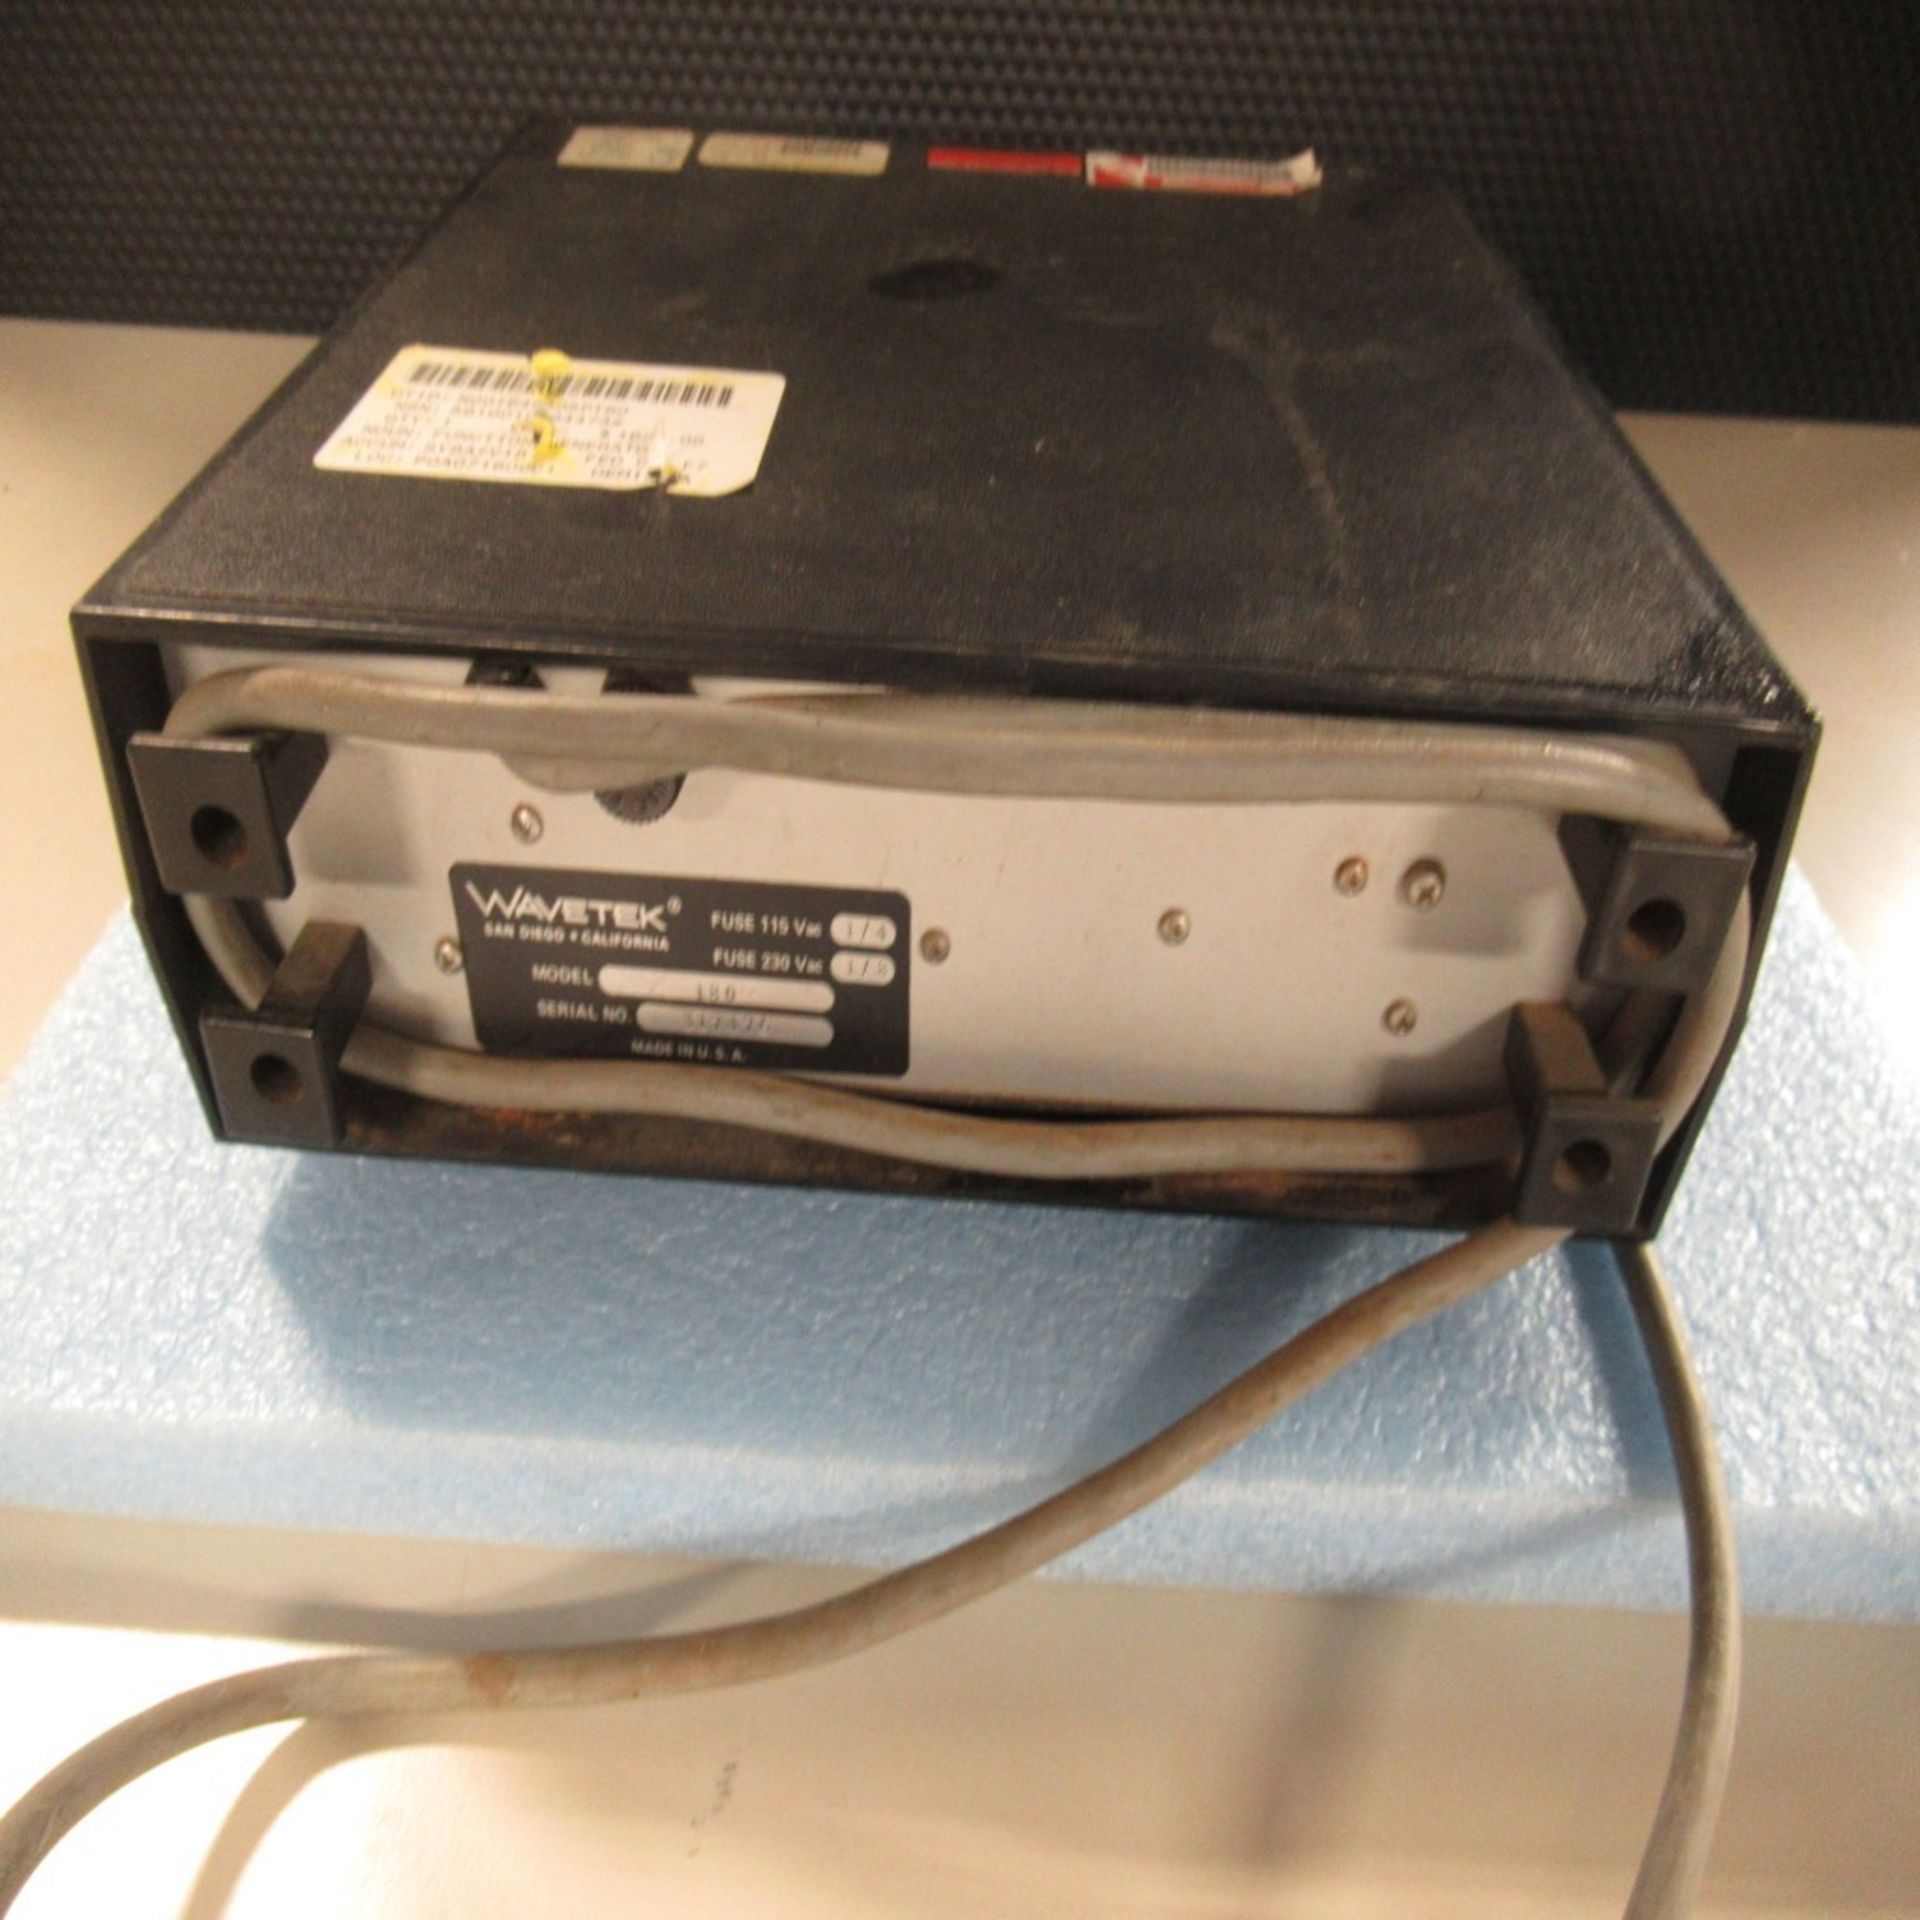 PHOTON SNAP SHOT MODEL 6000 *POWERS ON* NO SCREEN DISPLAY; FARNELL AP20-80 REGULATED POWER SUPPLY * - Image 161 of 222